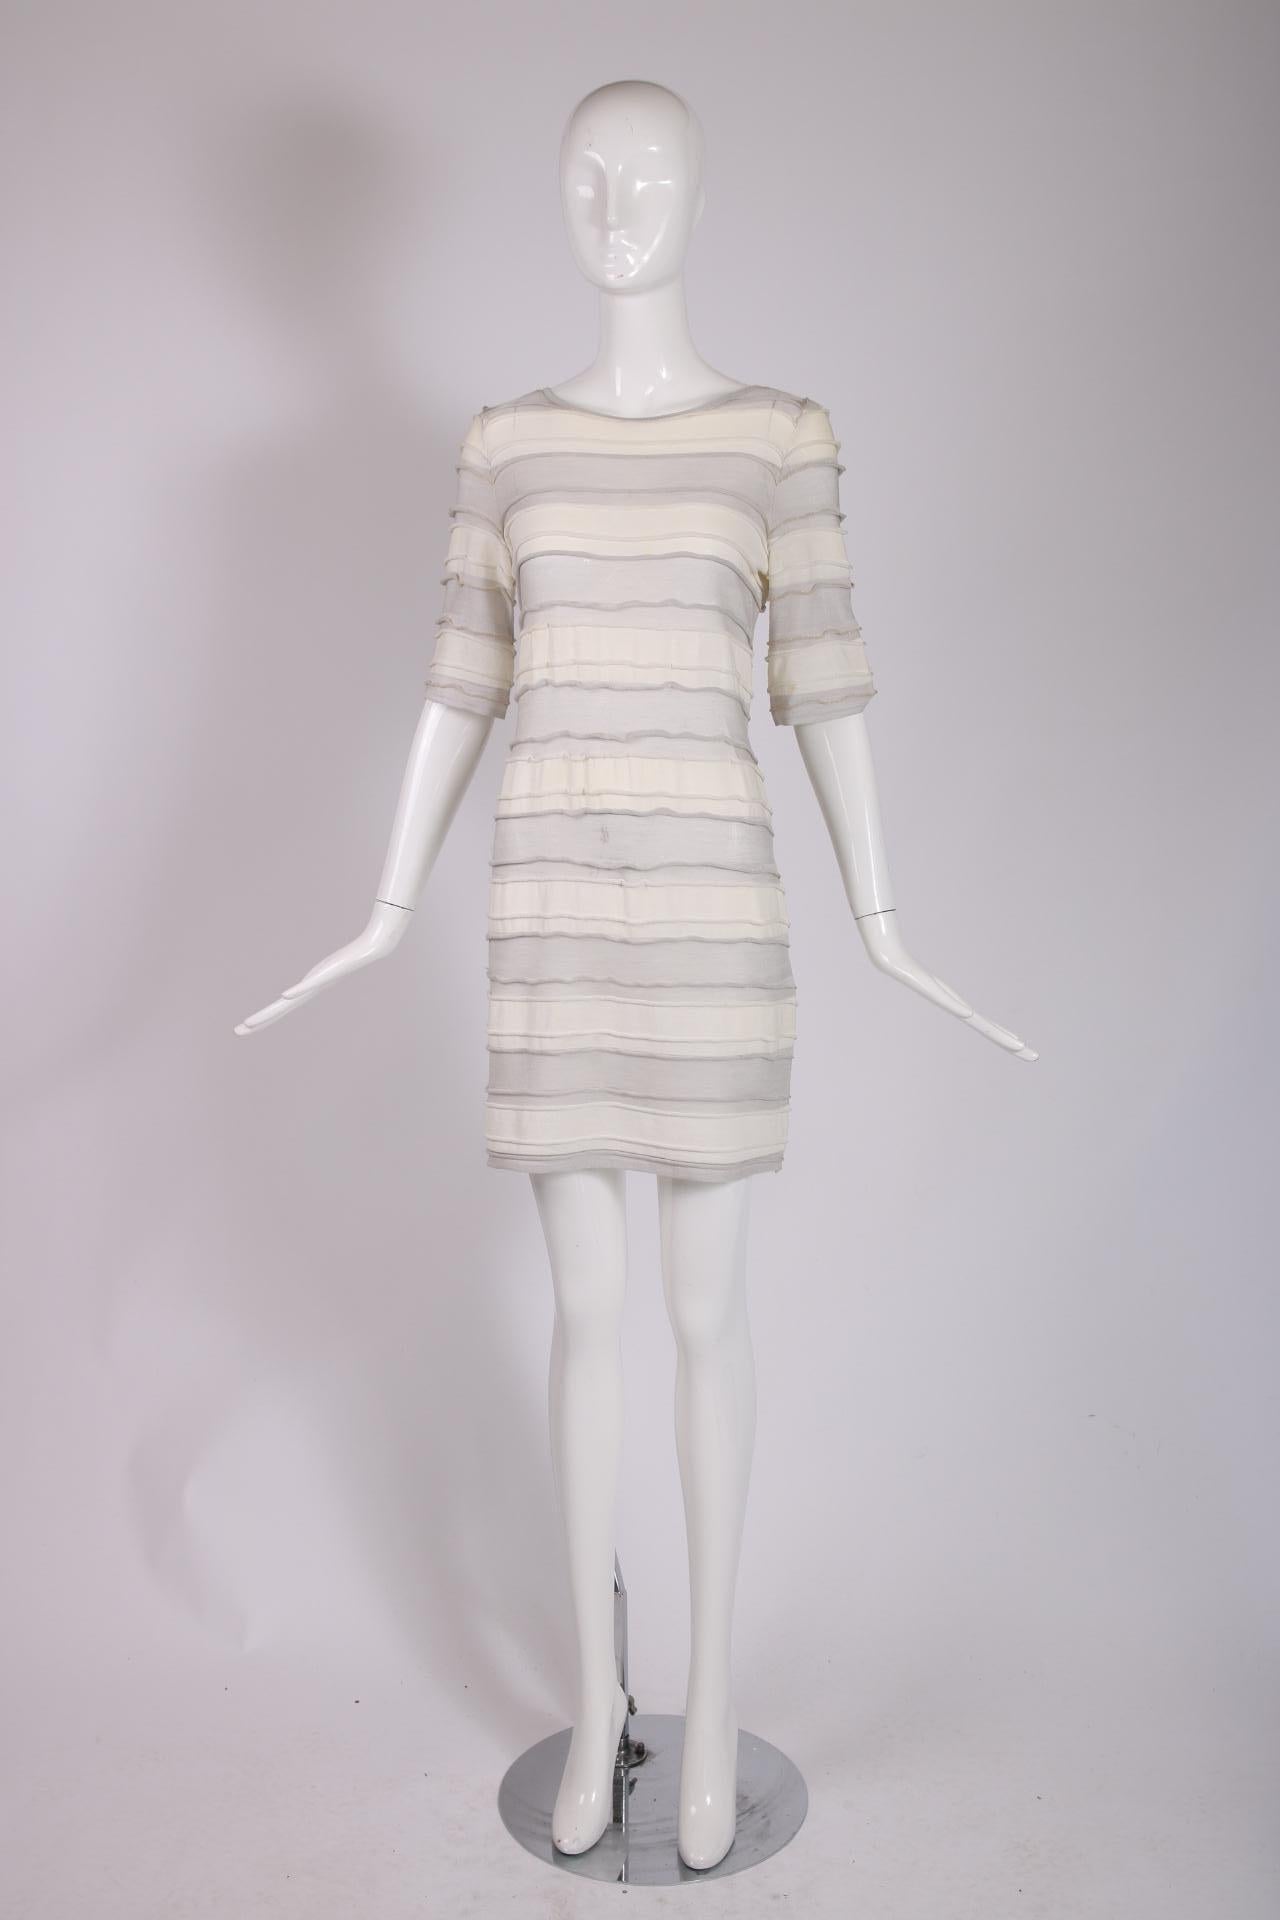 2009 Cruise collection Chanel mini dress in a repeating pattern of pale grey and off-white stripes with horizontal ribbing interwoven with pale silver and gold metallic lurex threads. Fabric is a silk, cotton and synthetic blend. Size tag 36 - in